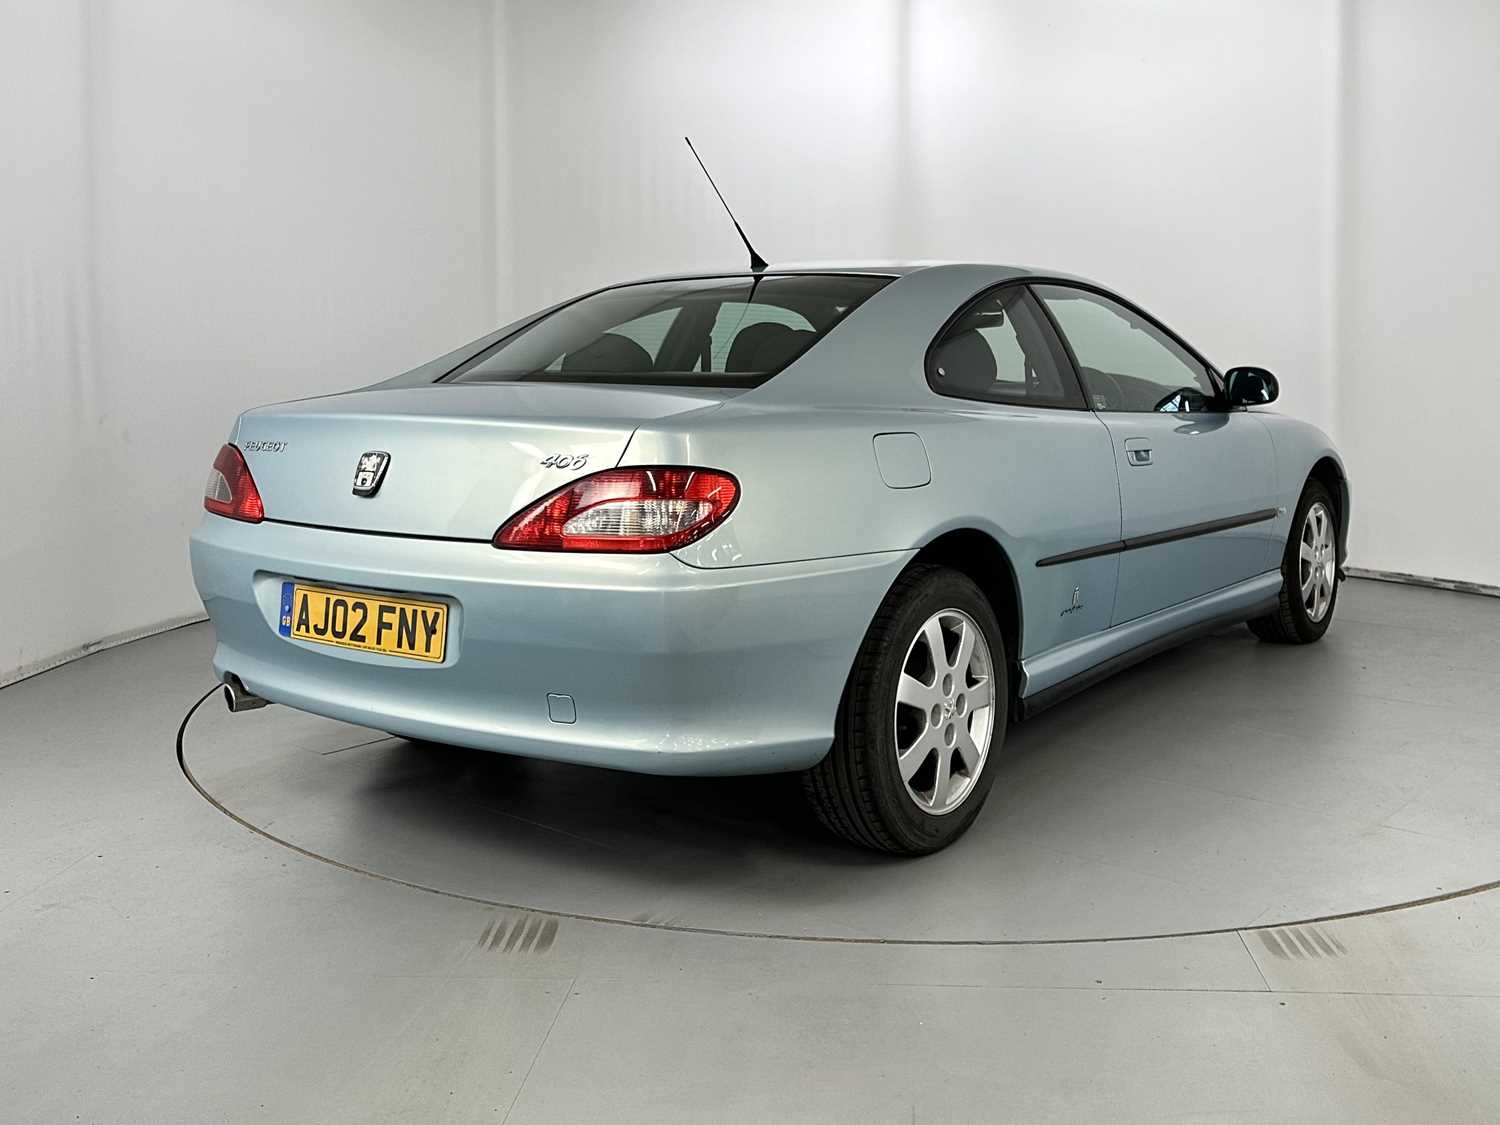 2002 Peugeot 406 Coupe - Image 9 of 28